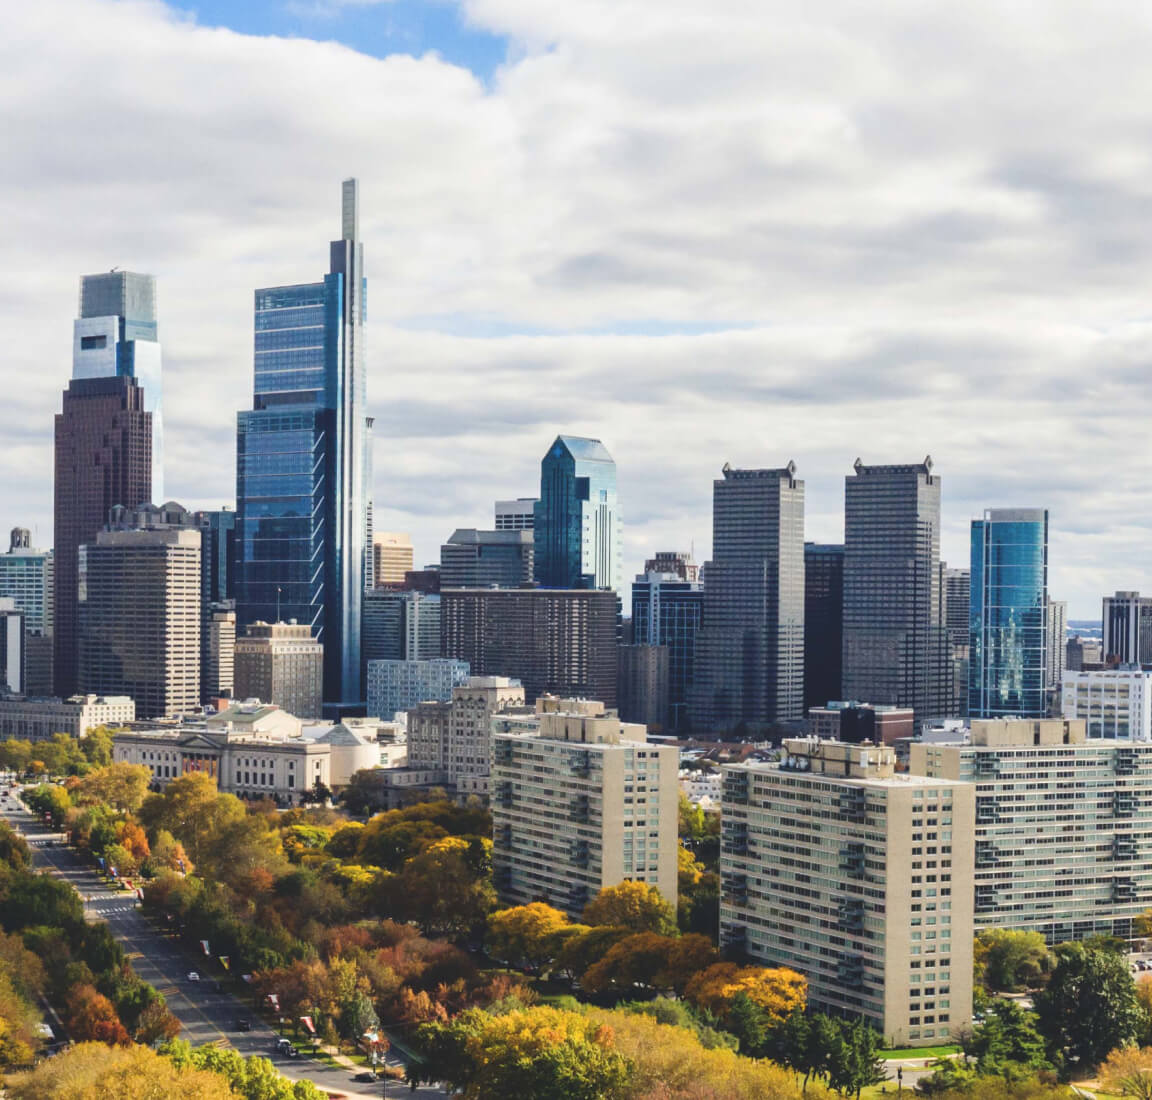 Photograph of the Philadelphia skyline with large buildings and autumn trees